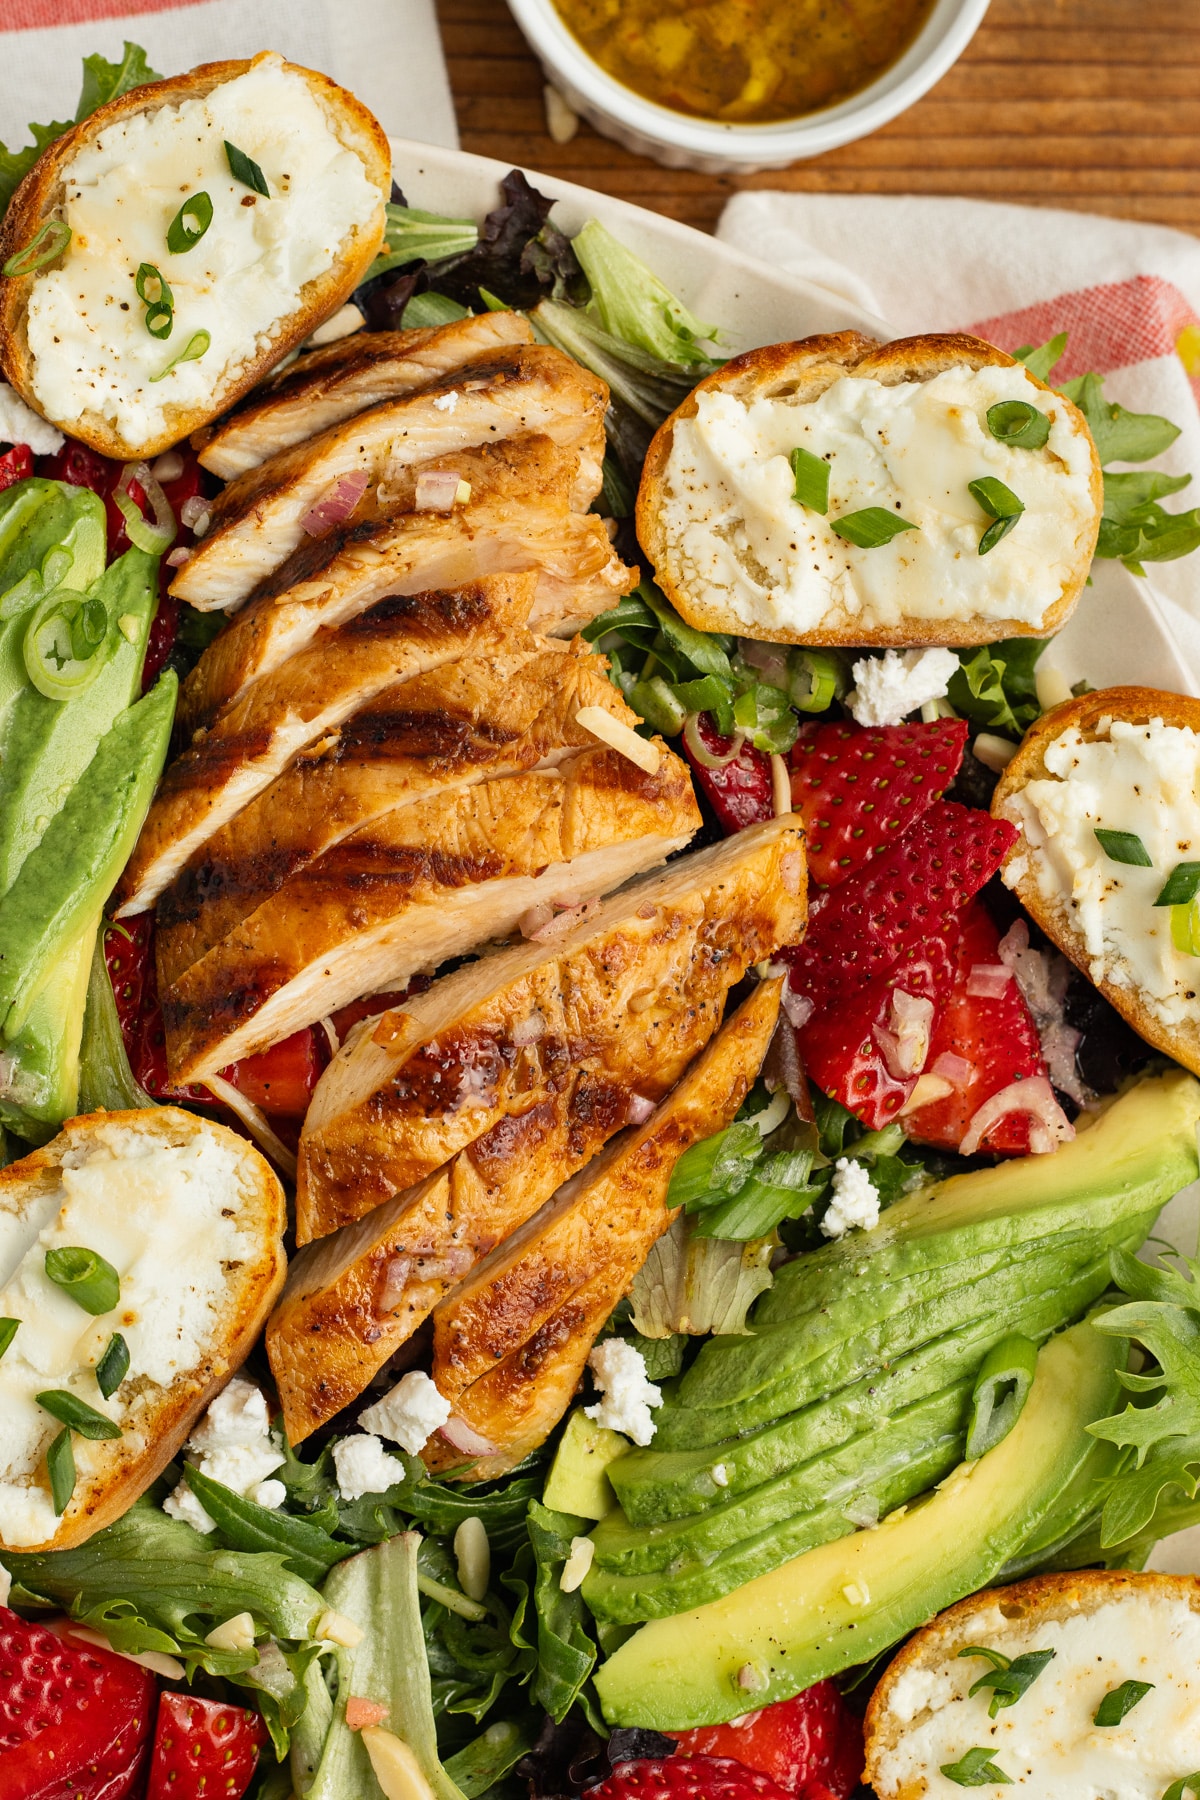 This is a picture of the grilled chicken salad with goat cheese crostini, avocado and strawberries.